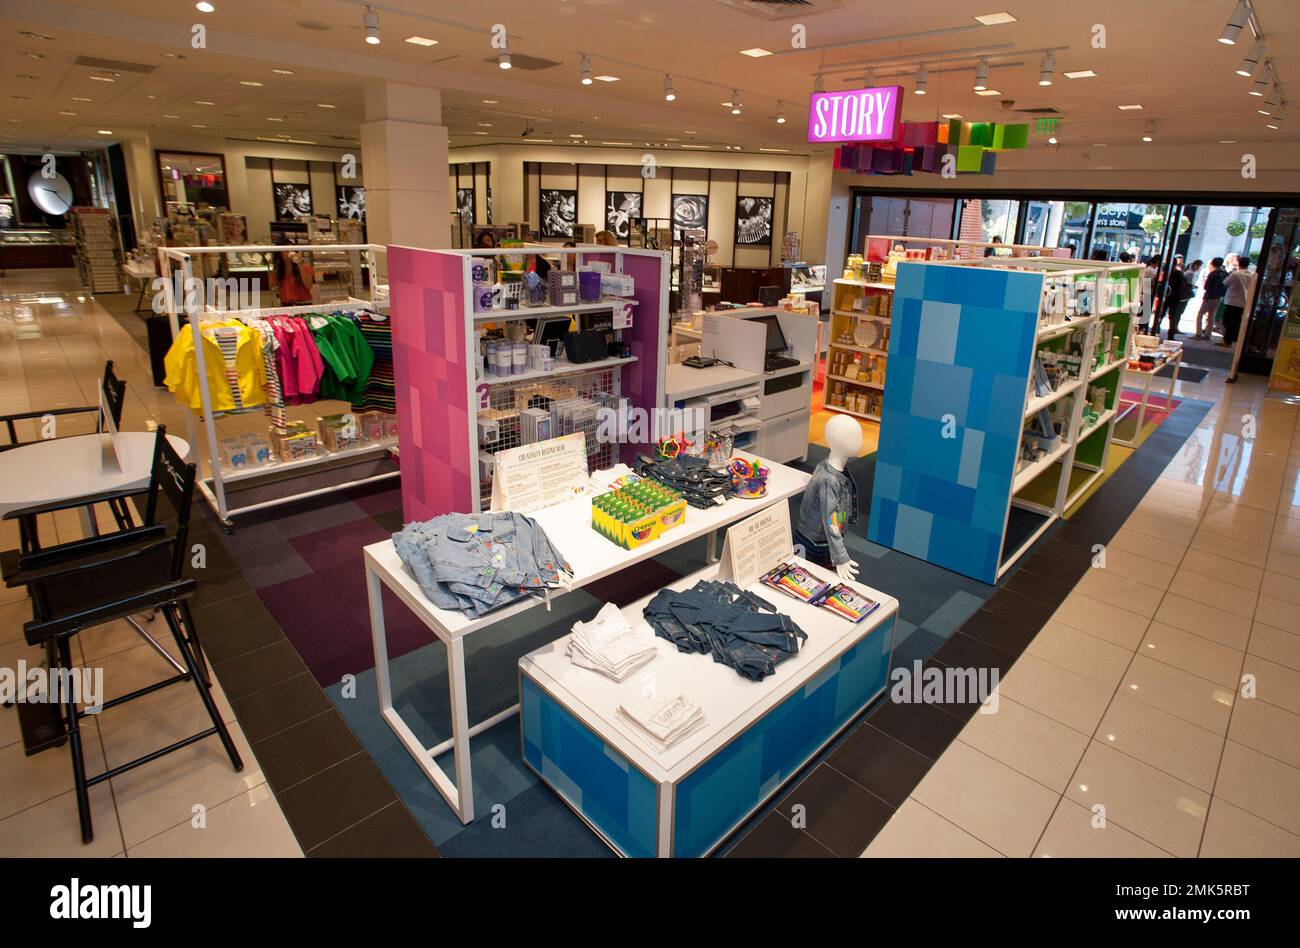 IMAGE DISTRIBUTED FOR MACY'S- Macy's launches STORY, the narrative-driven  retail experience in 36 stores nationwide, including Macy's South Coast  Plaza, on Wednesday, April 10, 2019 in Costa Mesa, Calif. MAC Cosmetics,  Crayola,